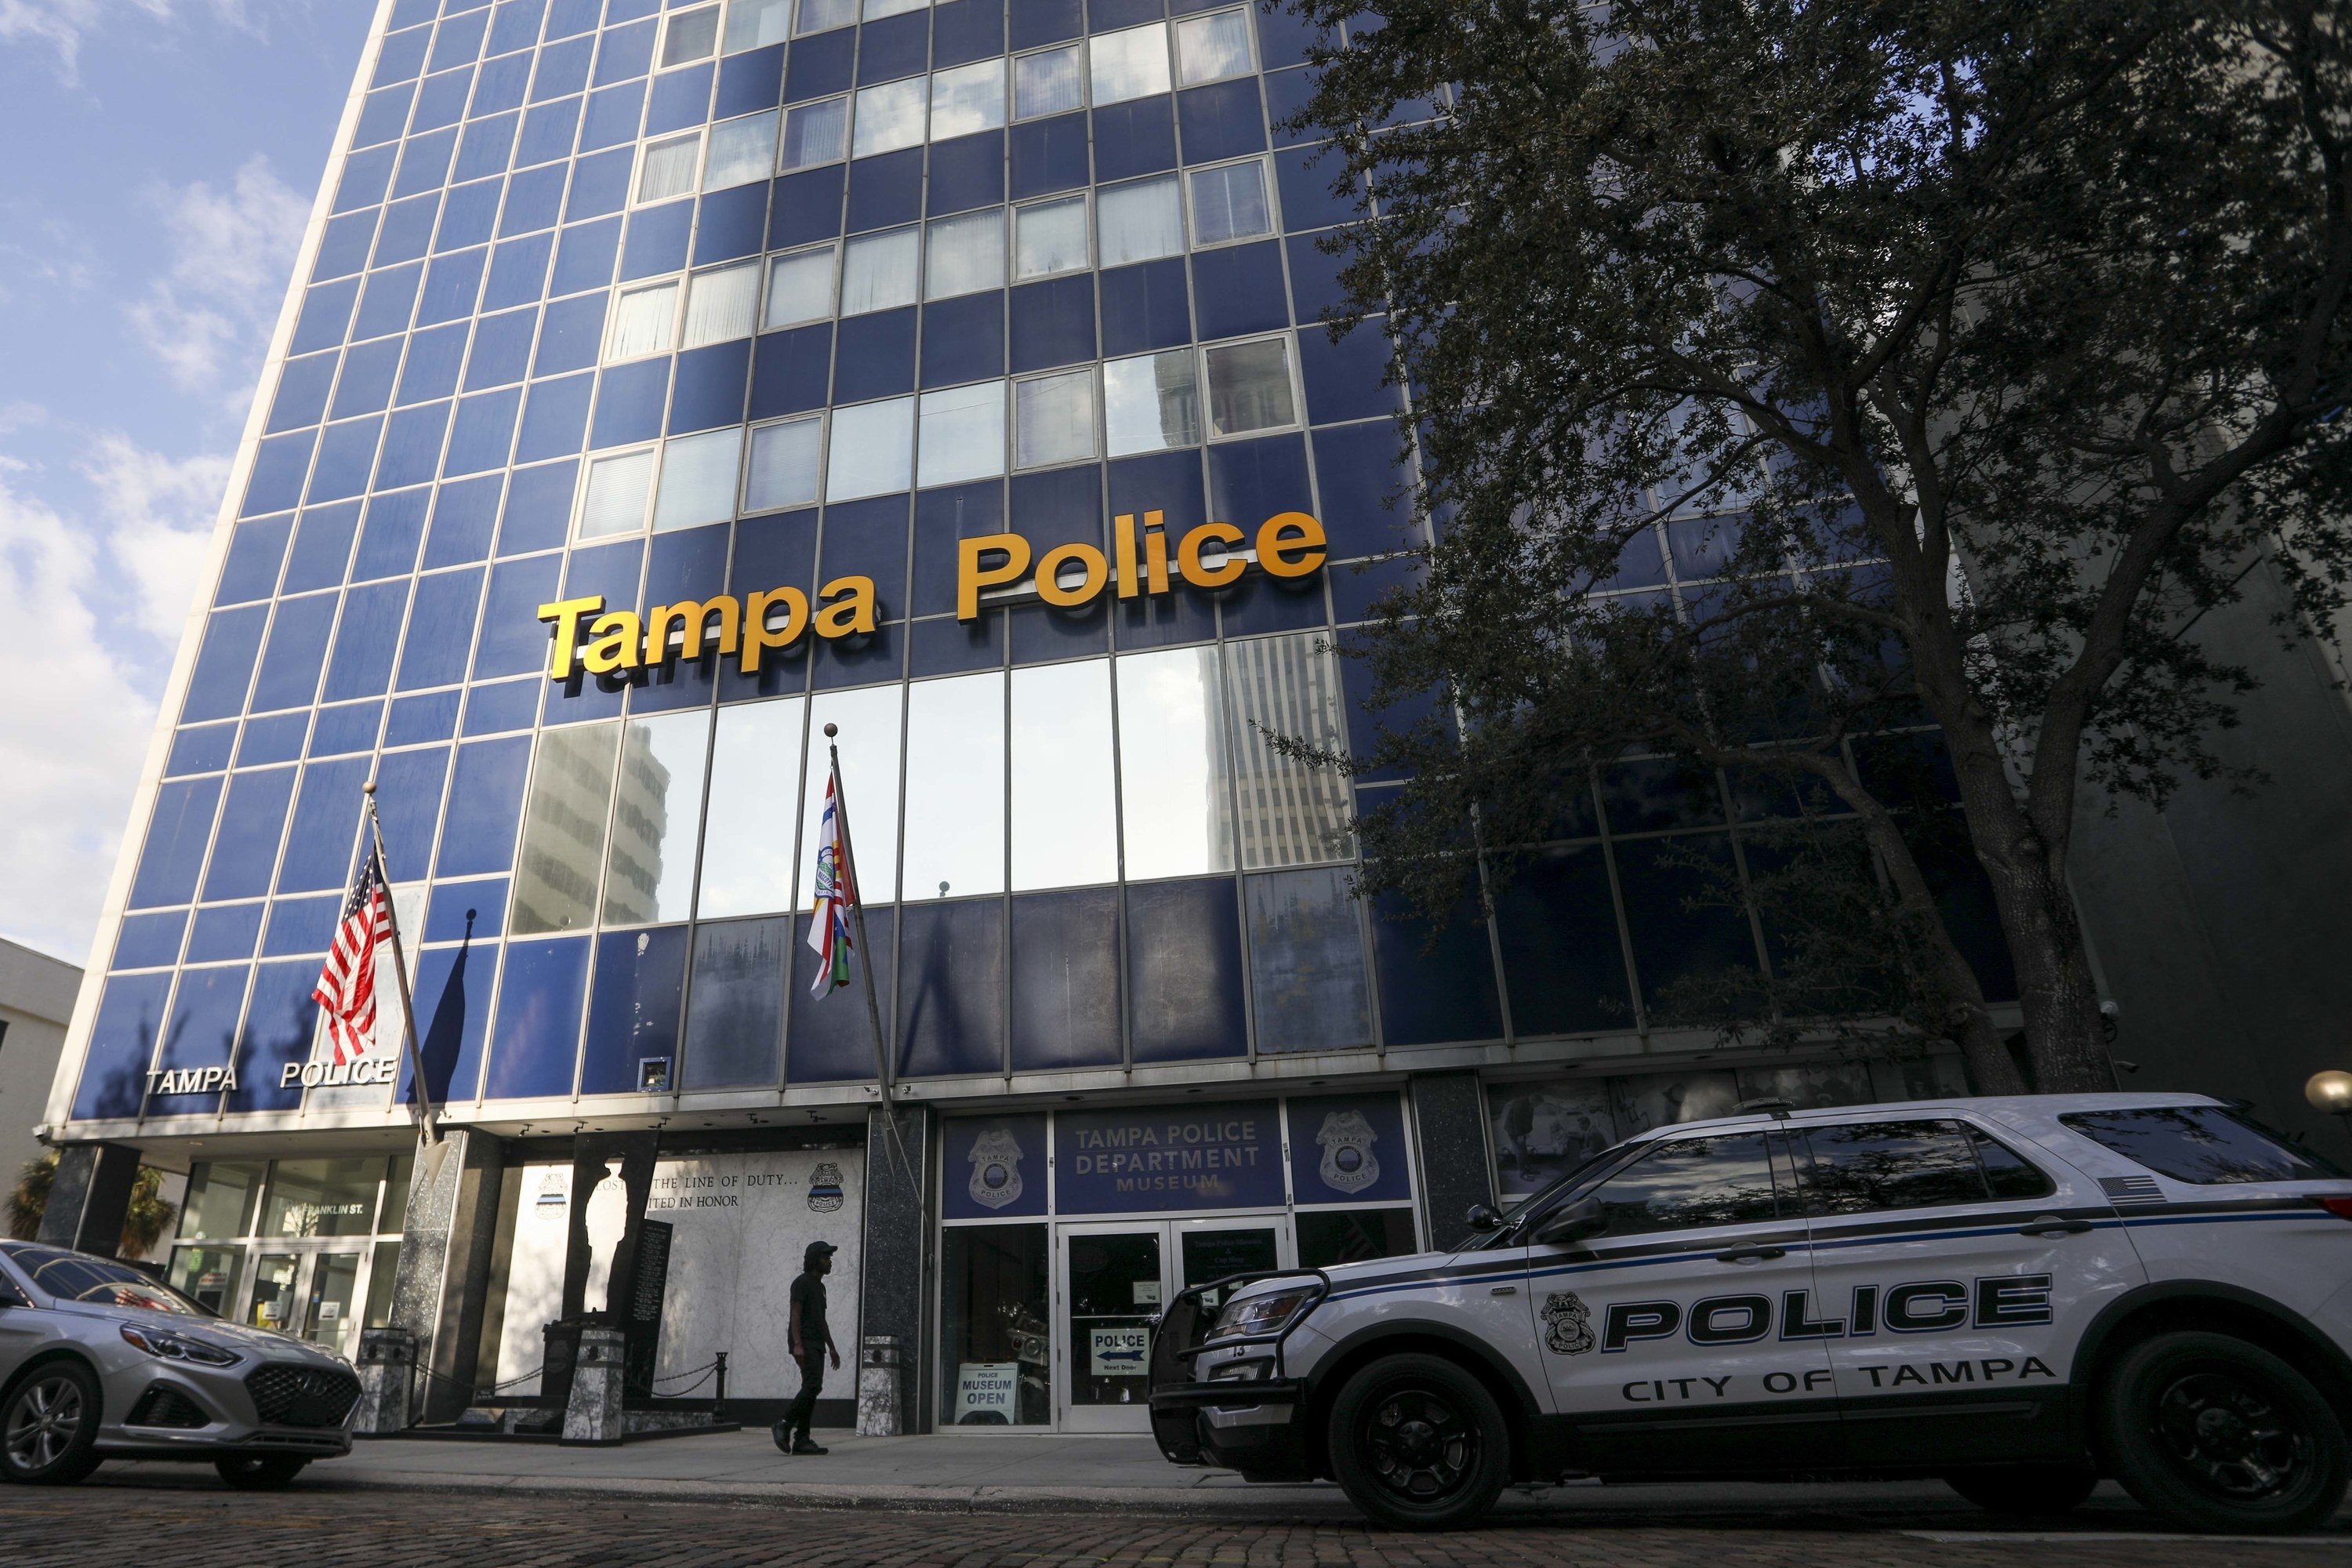 The exterior of a skyscraper reads &quot;Tampa Police&quot; with police vehicles parked on the street